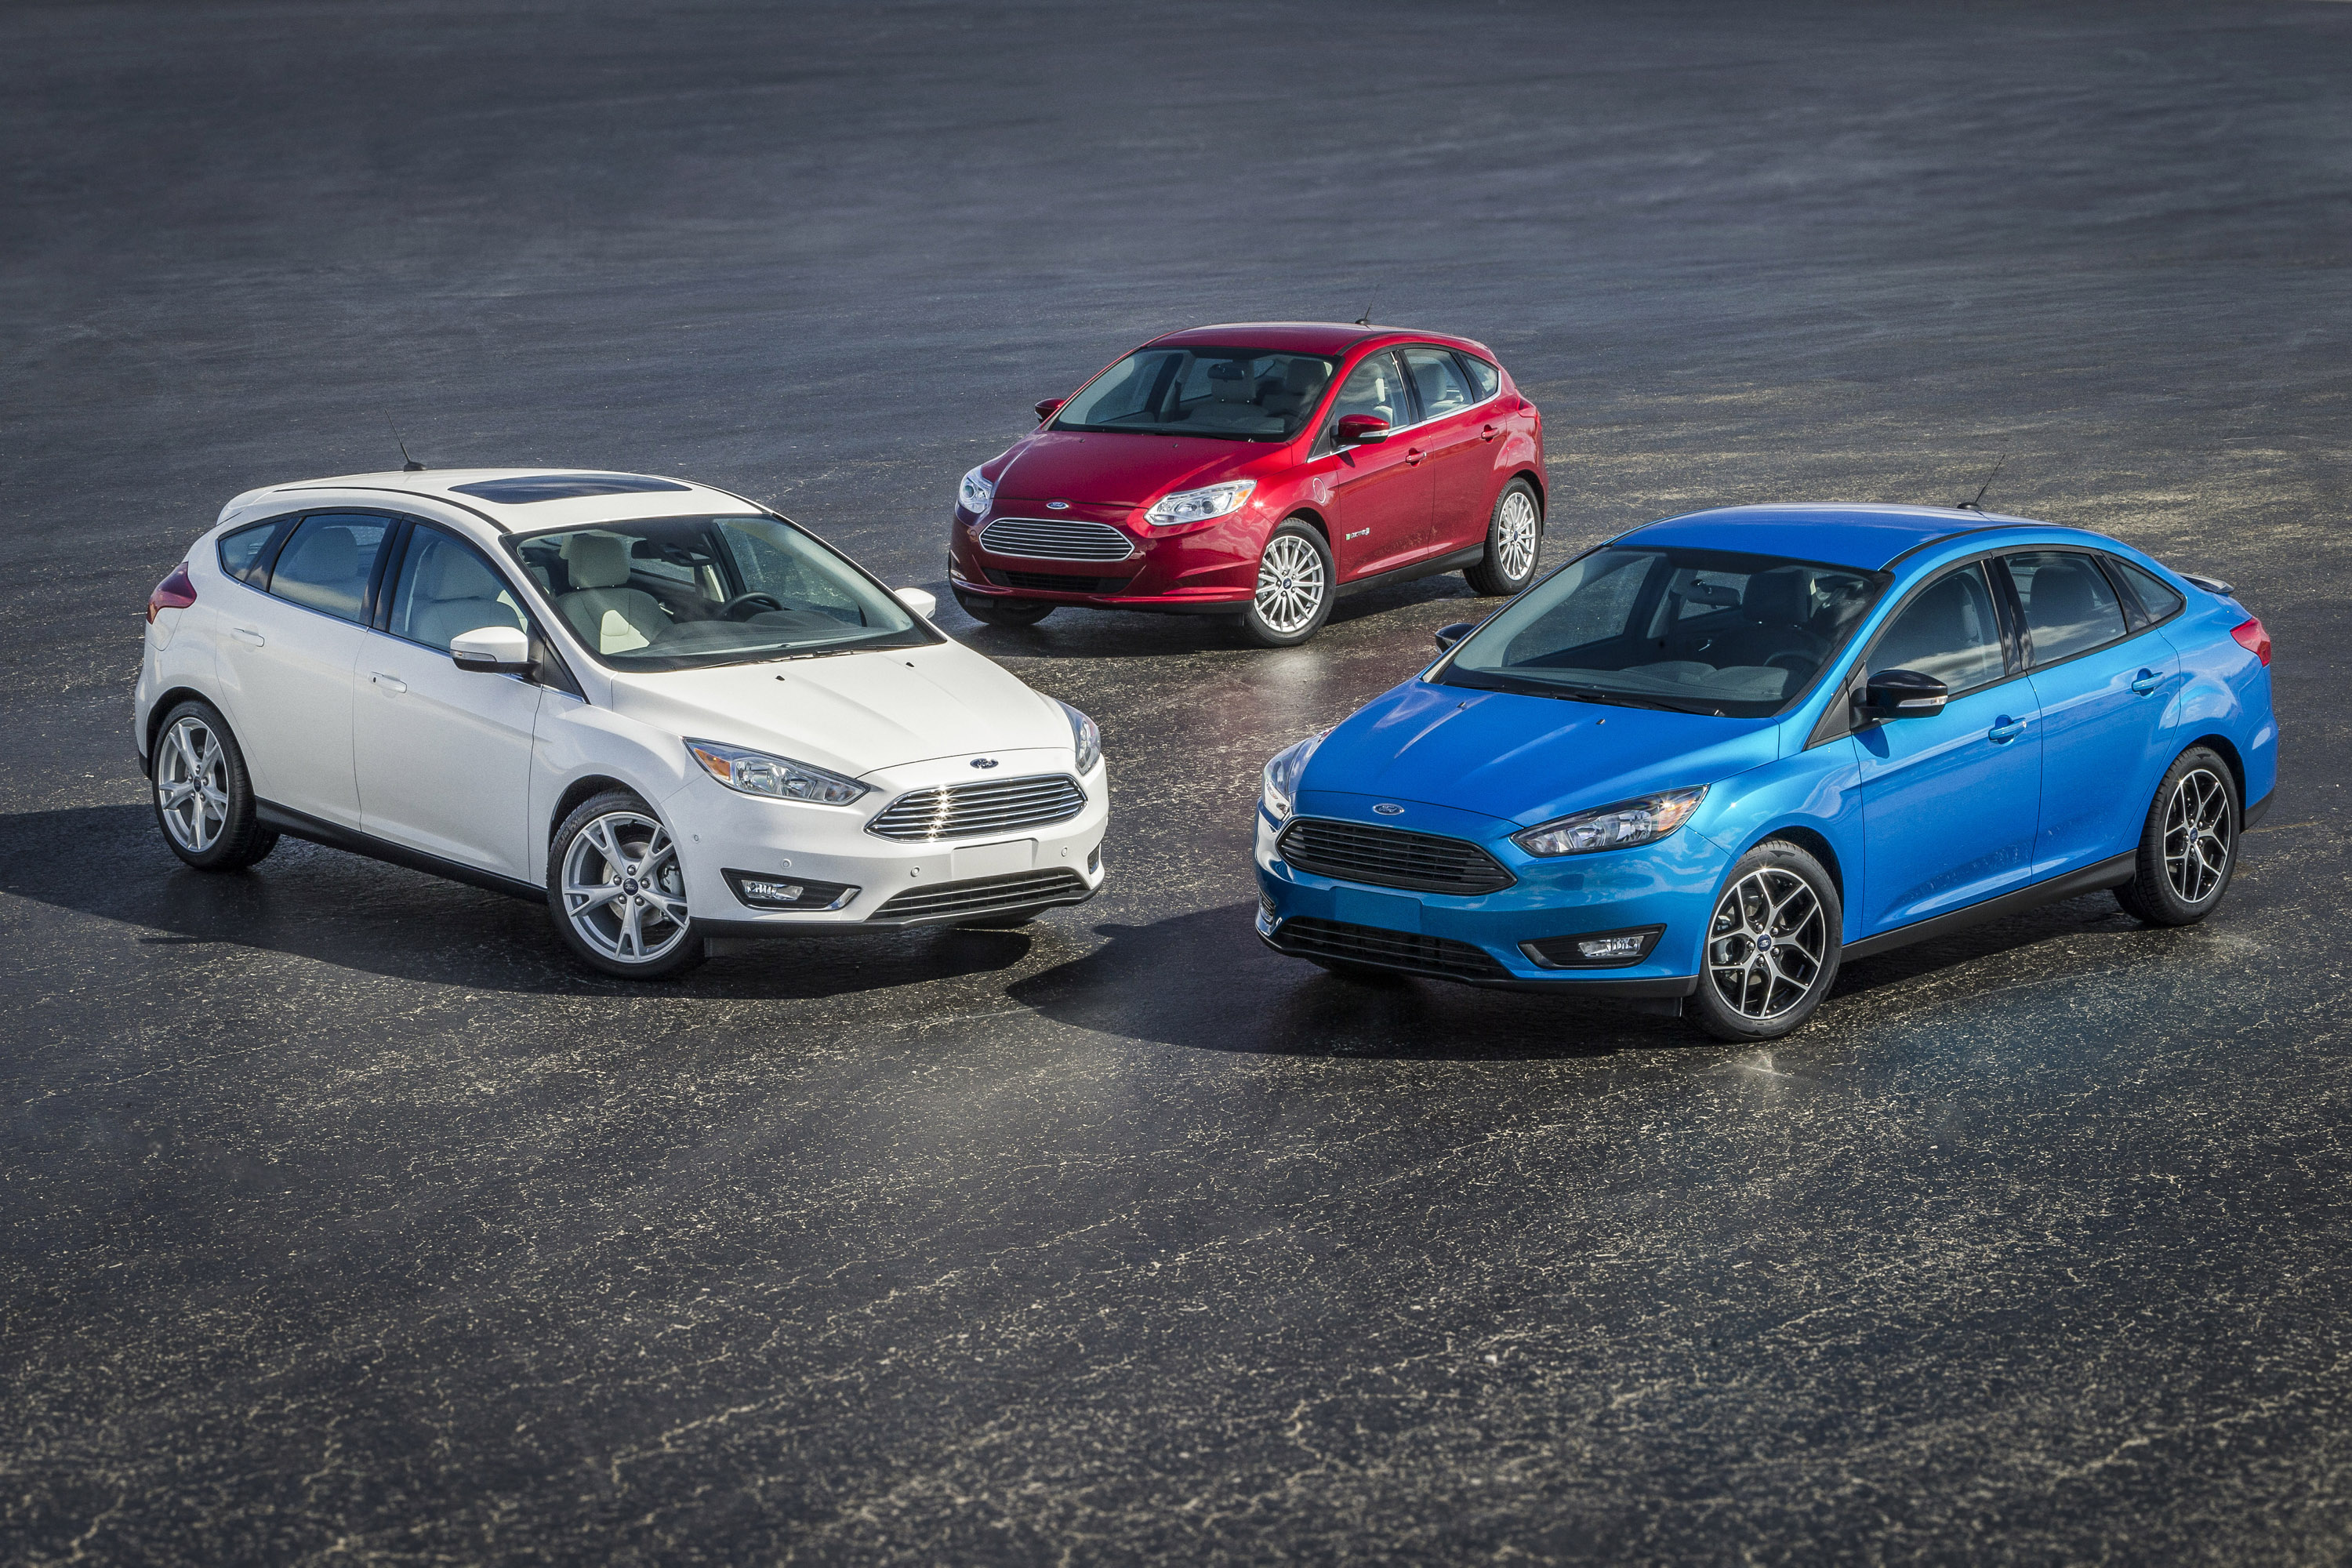 2015 Ford Focus And Focus Electric To Debut In New York